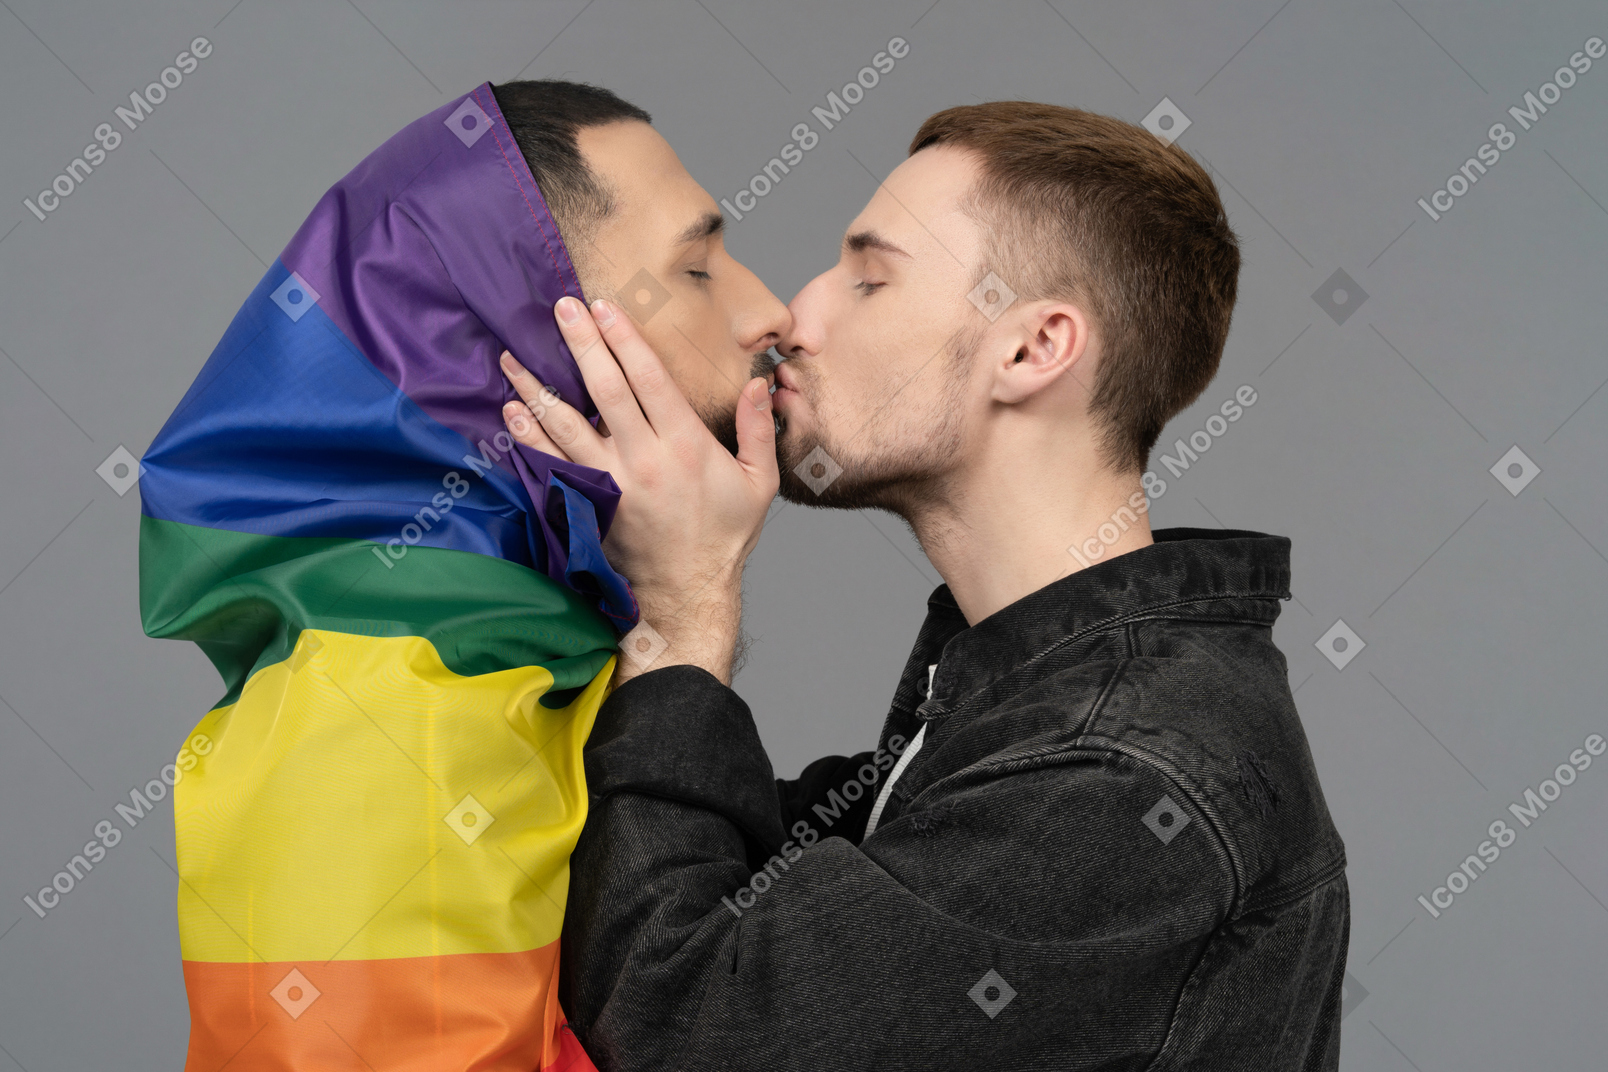 Close-up of young man kissing another man wrapped in lgbt flag